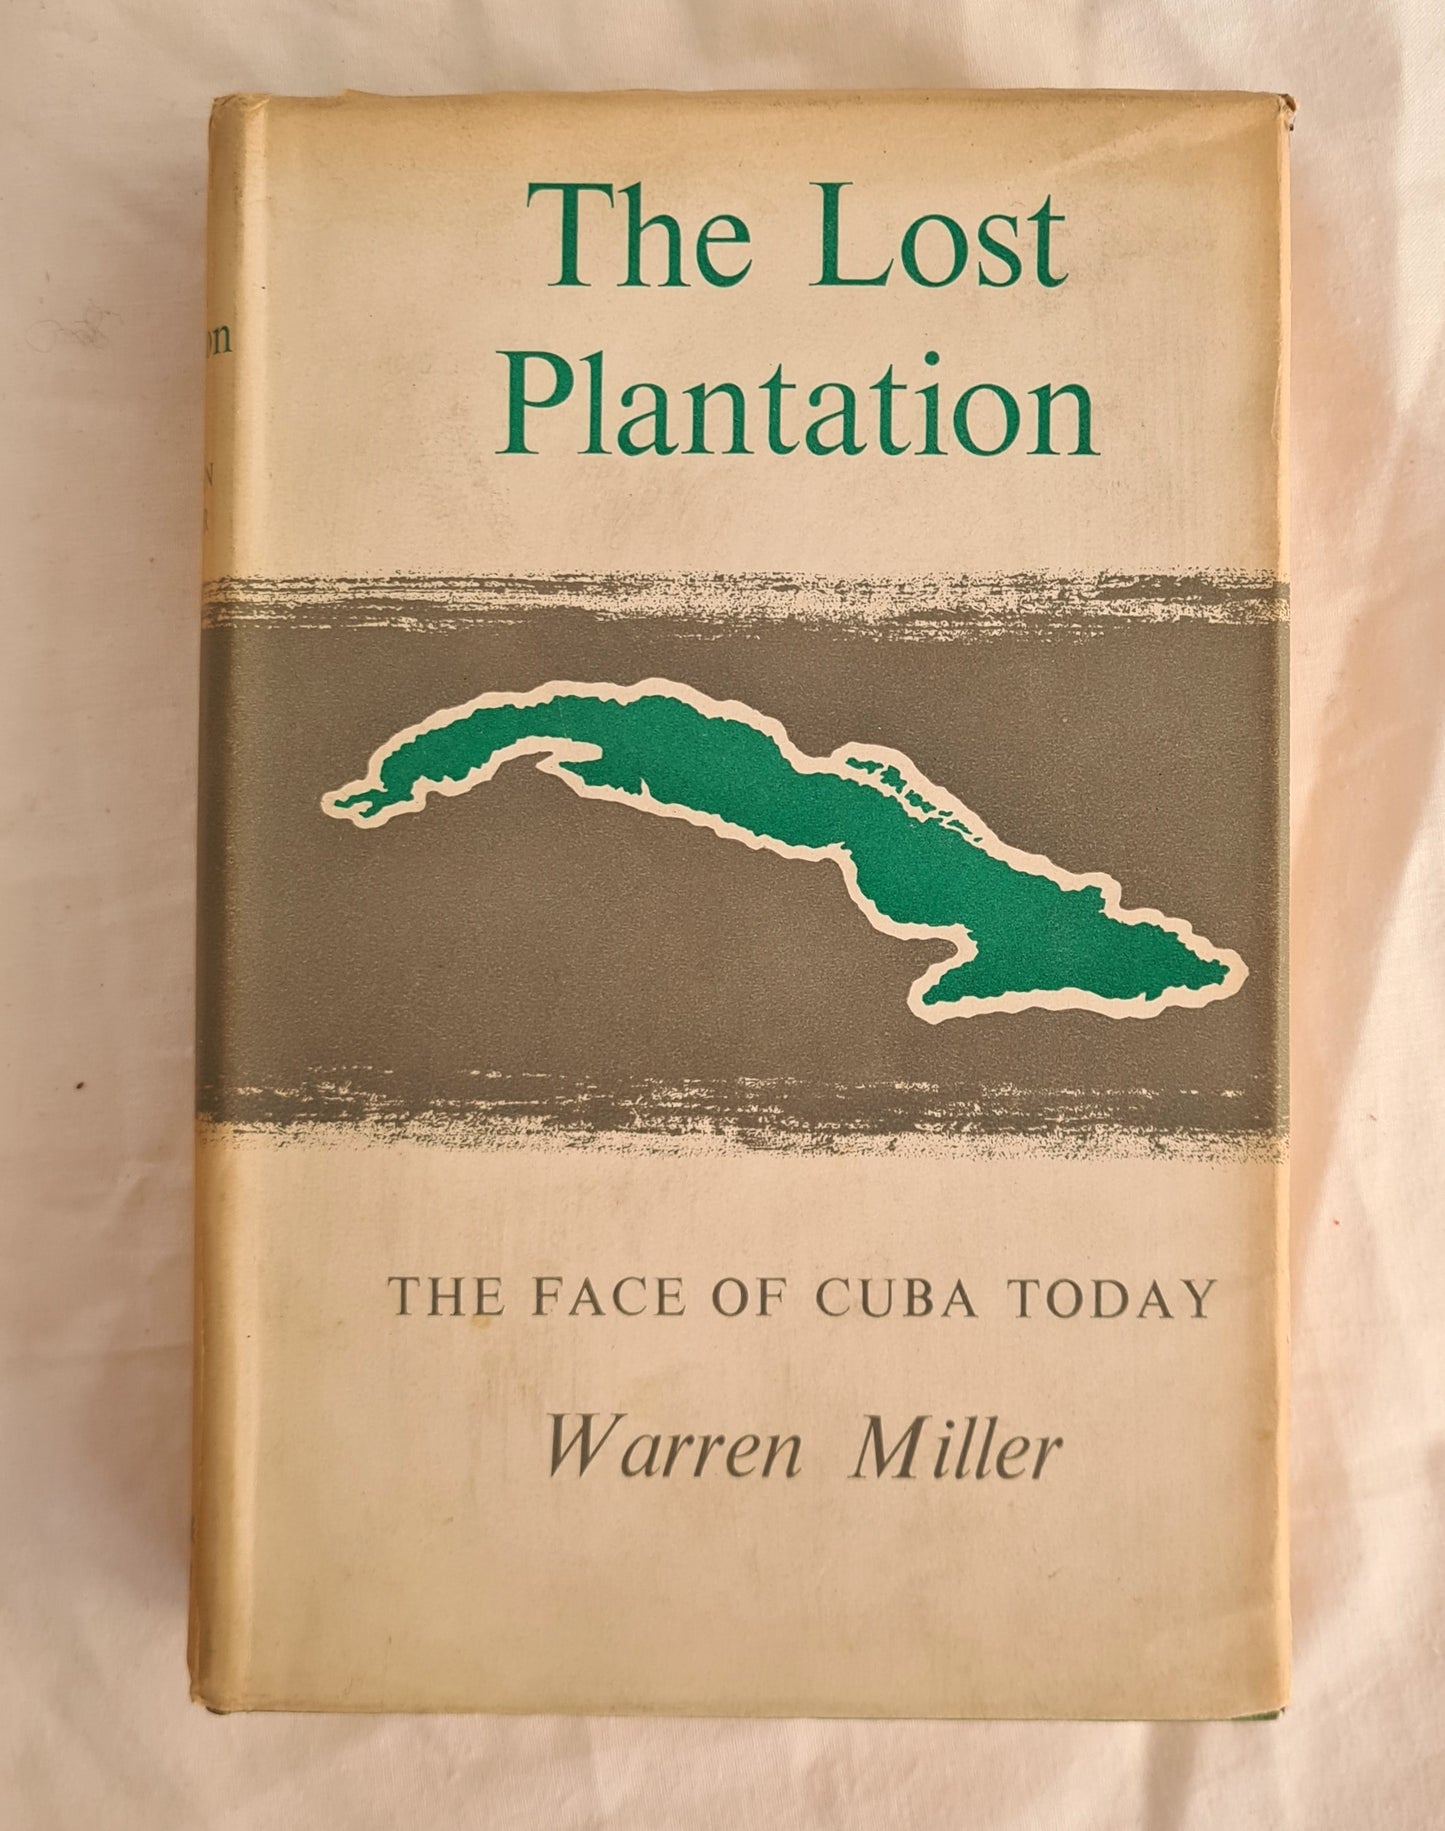 The Lost Plantation  The Face of Cuba Today  by Warren Miller